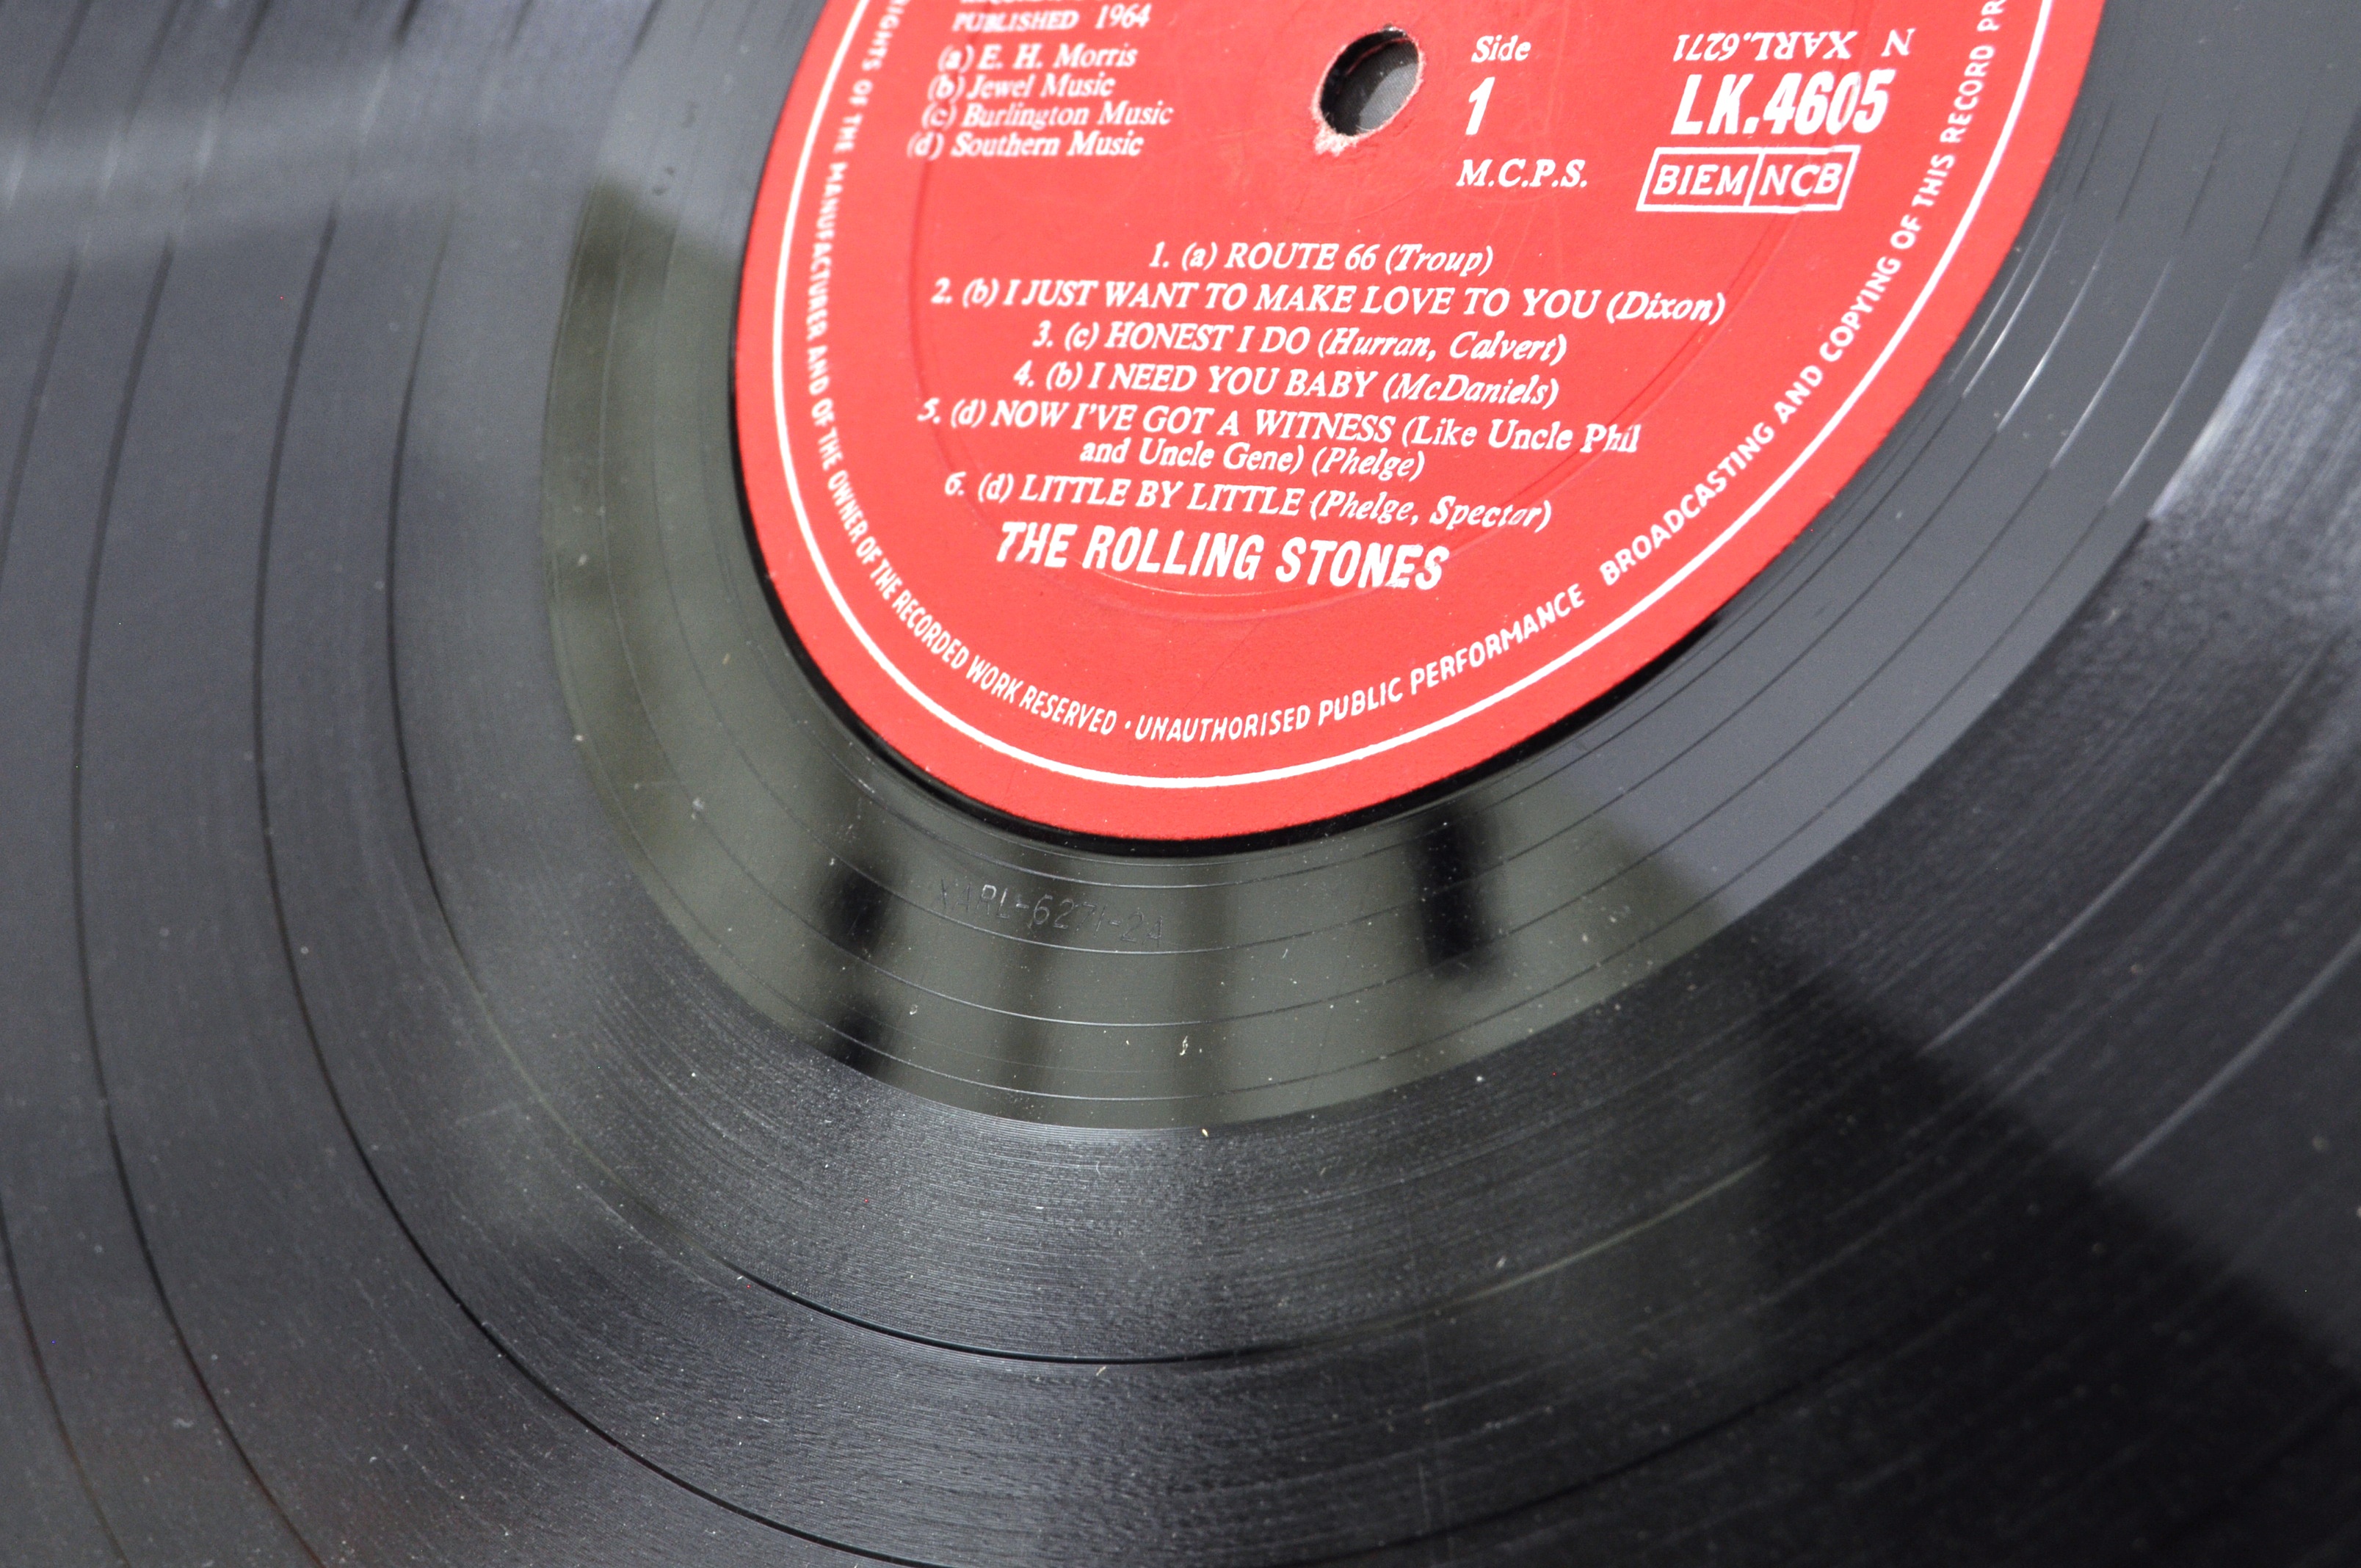 TWO ROCK ALBUMS MANFRED MANN AND THE ROLLING STONES - Image 4 of 5